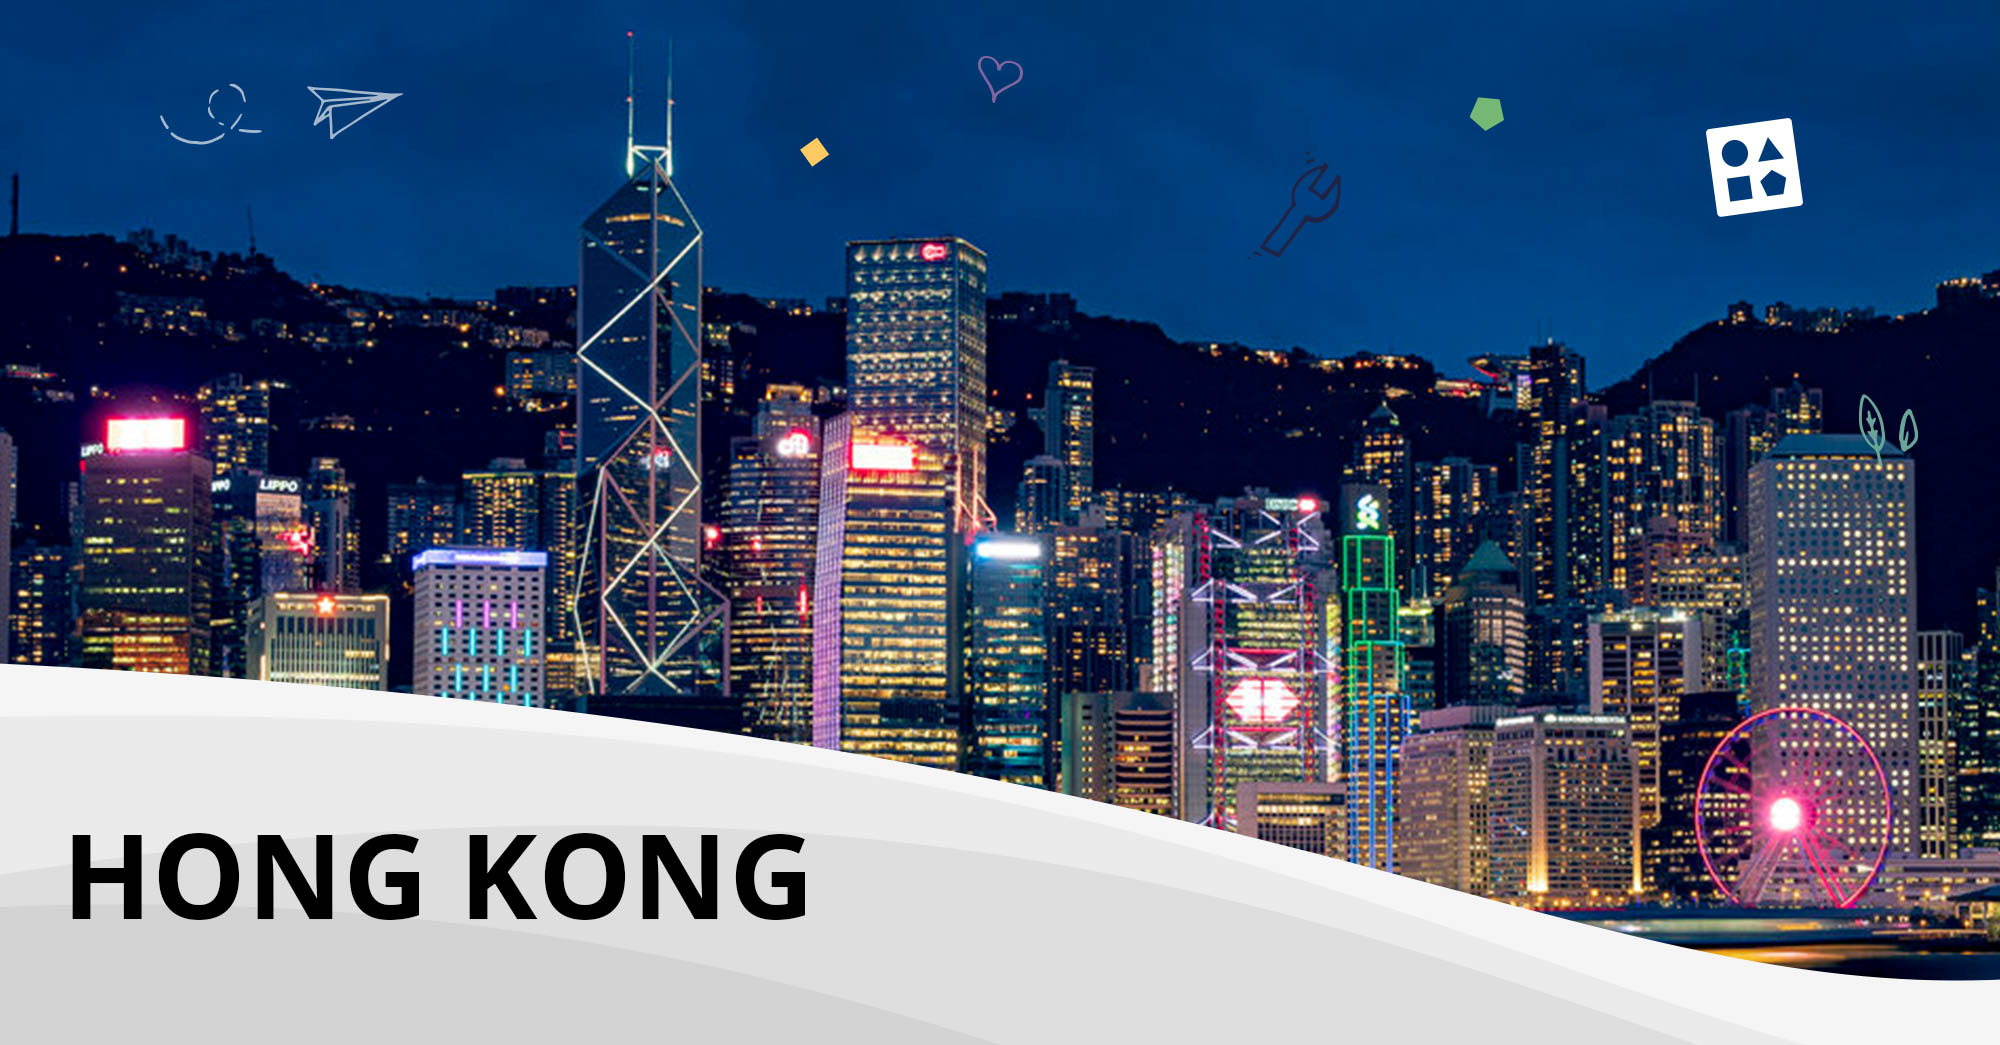 Global Shares expands in Asia with a new Hong Kong Team & Office